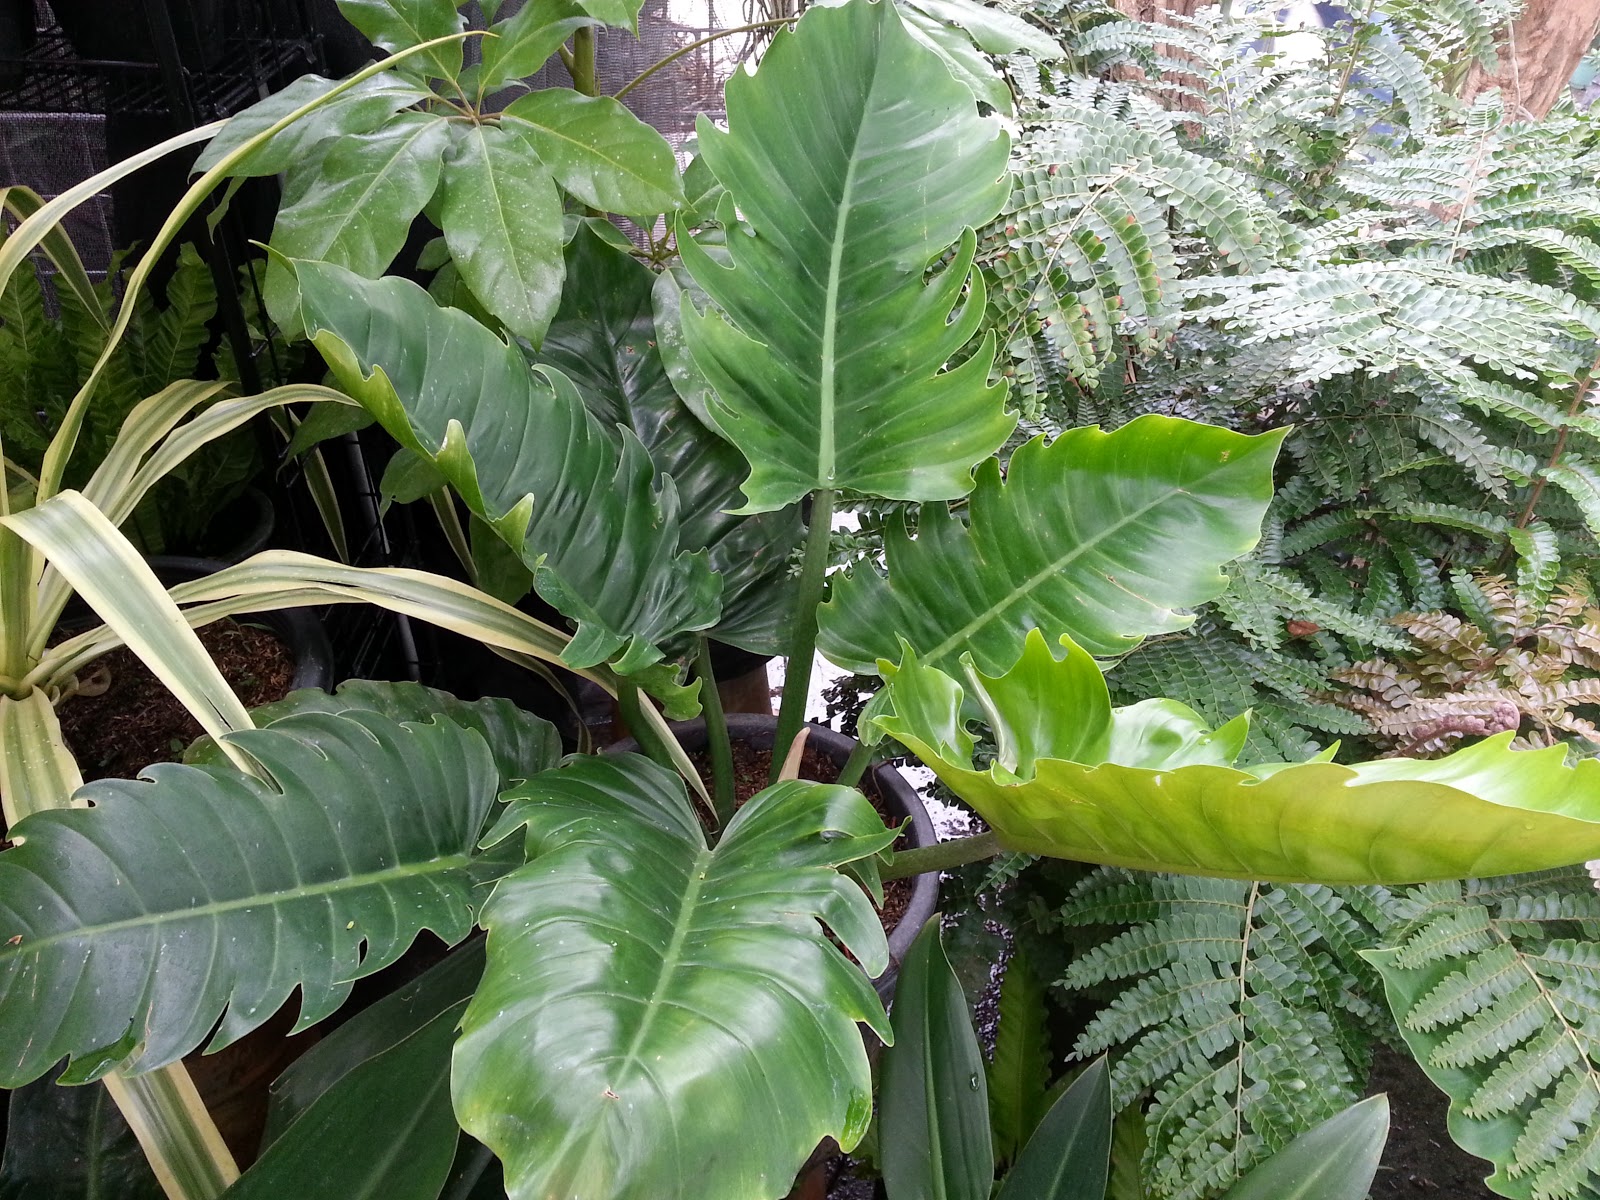 Philodendron Gardener: Some Philodendrons on Sale at the ...